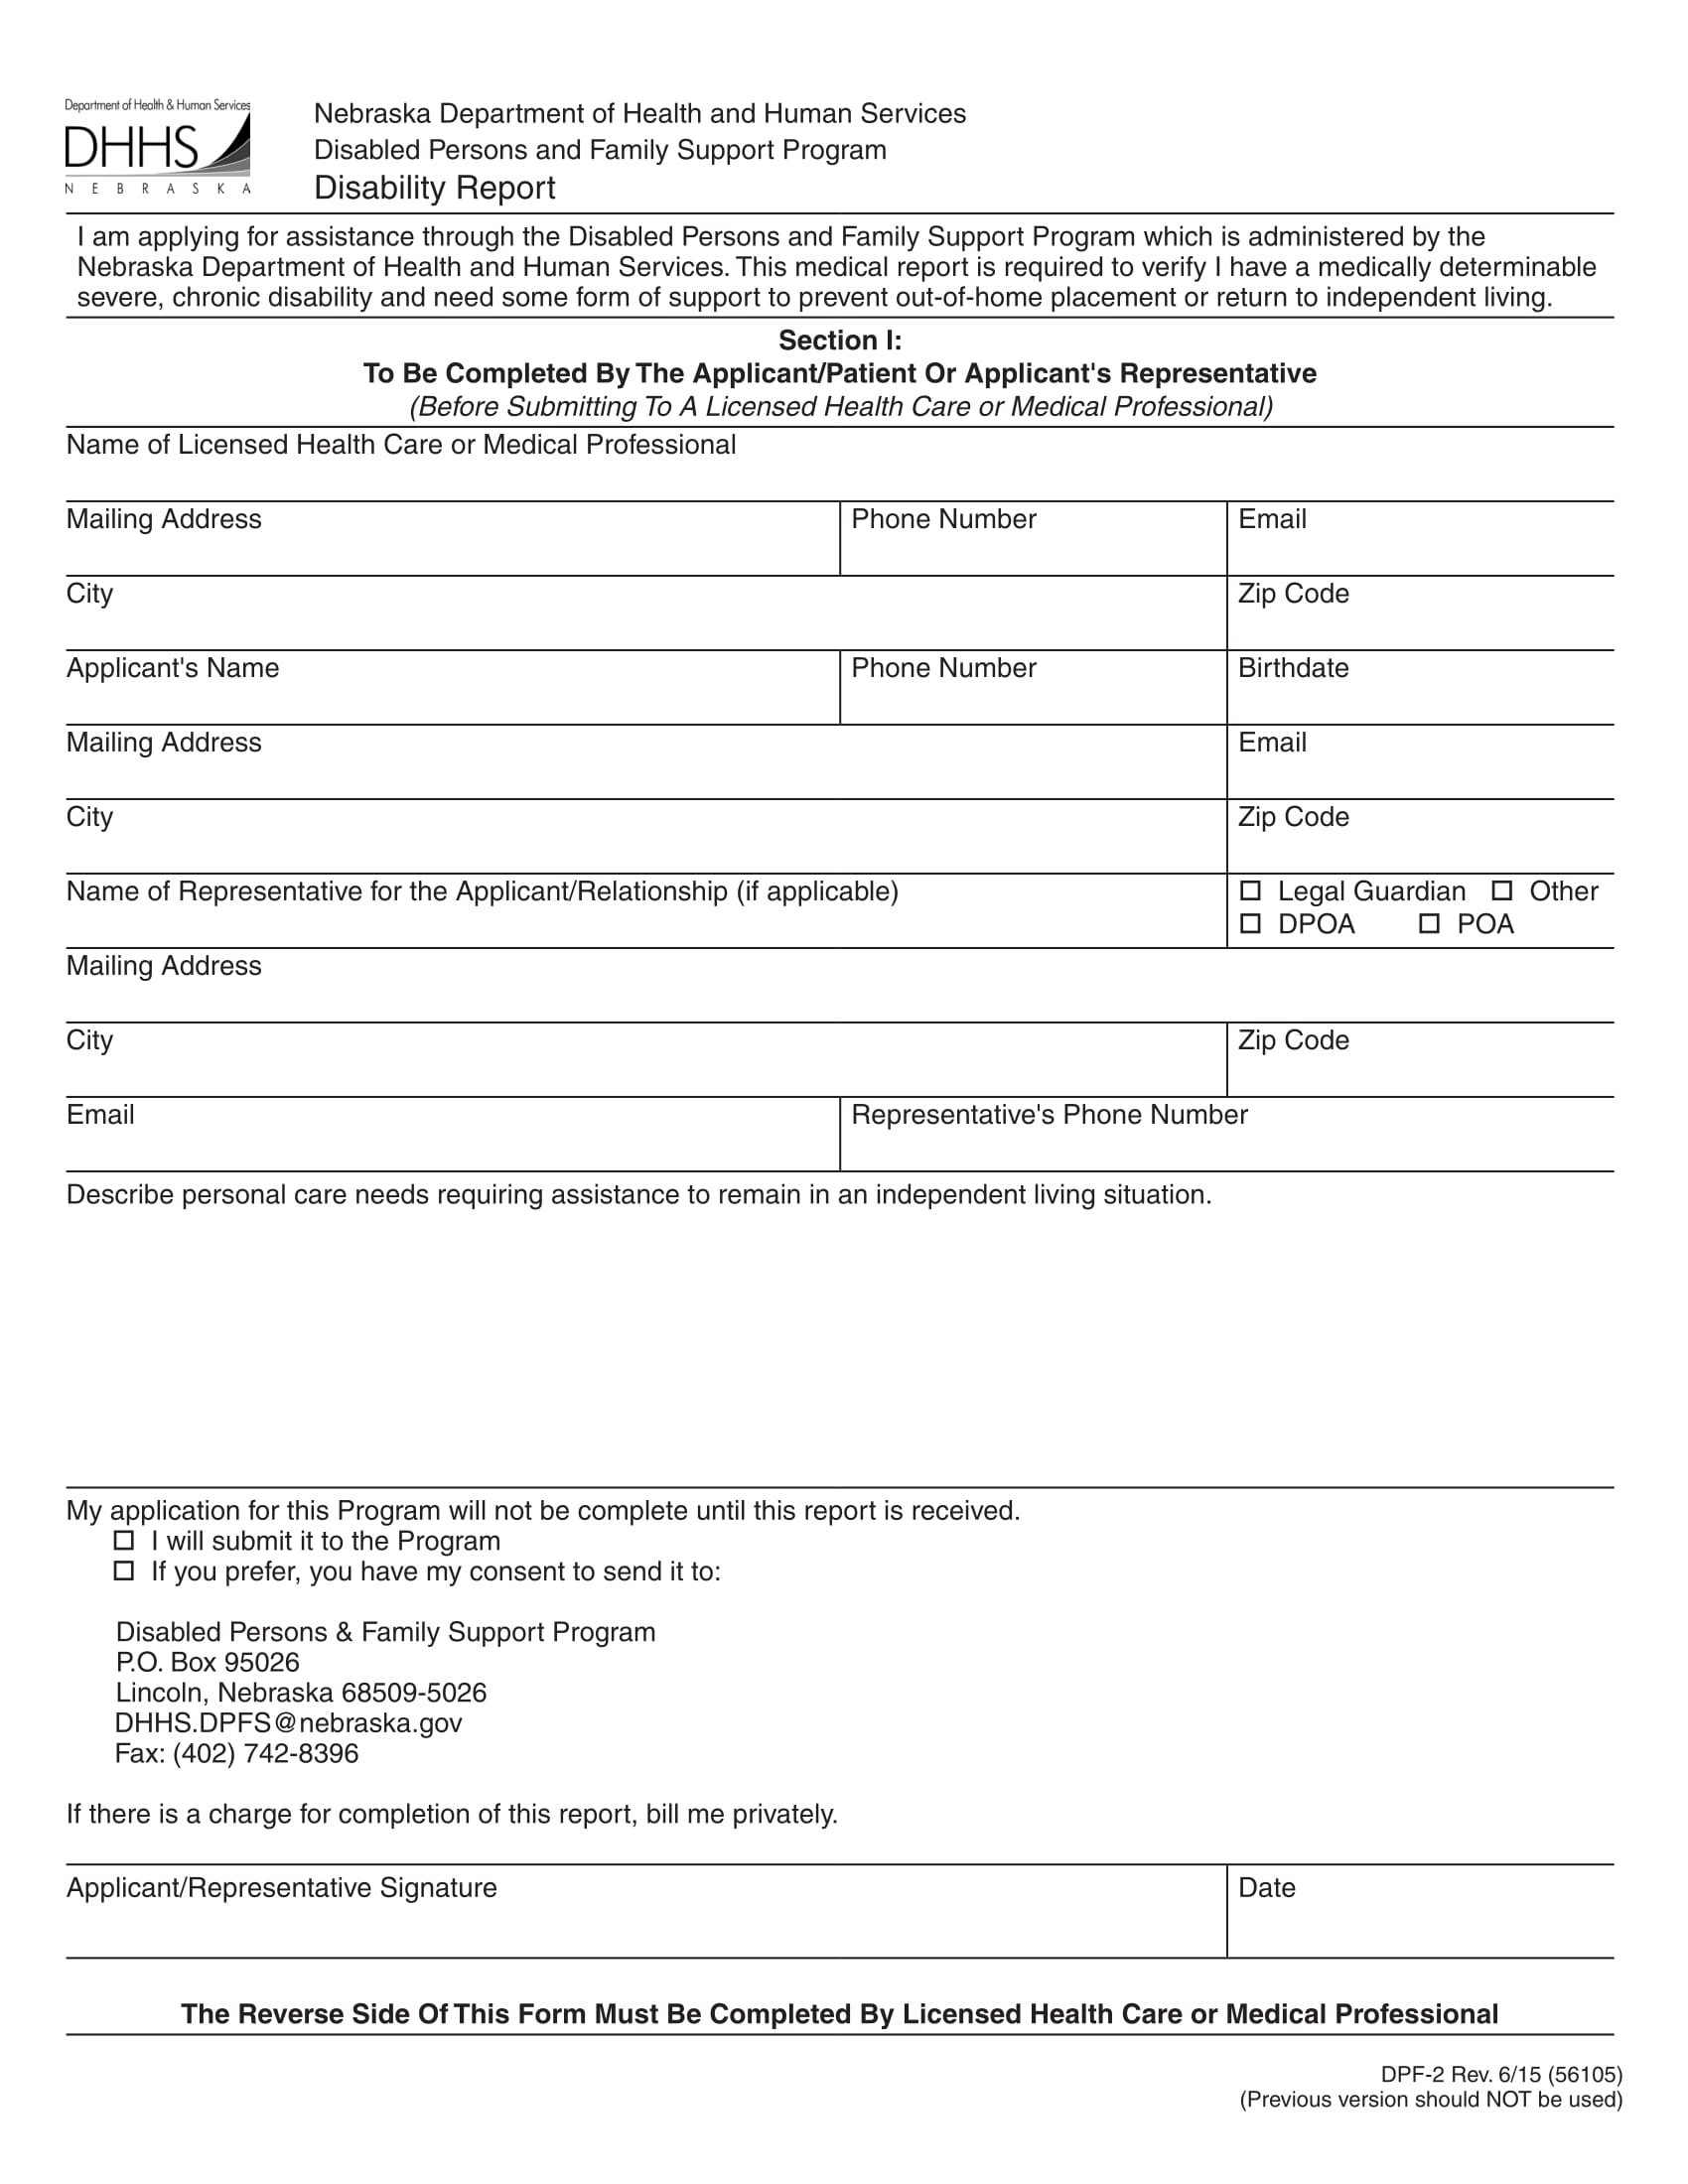 fillable disability report form 1